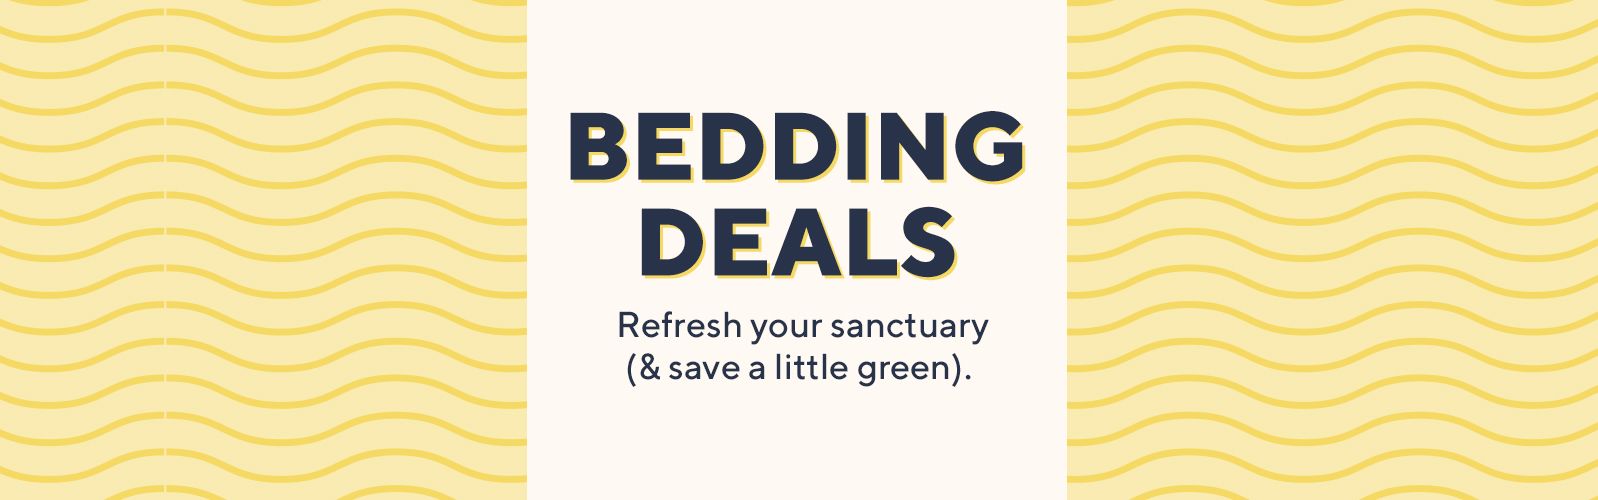 Bedding Deals - Refresh your sanctuary (& save a little green). 